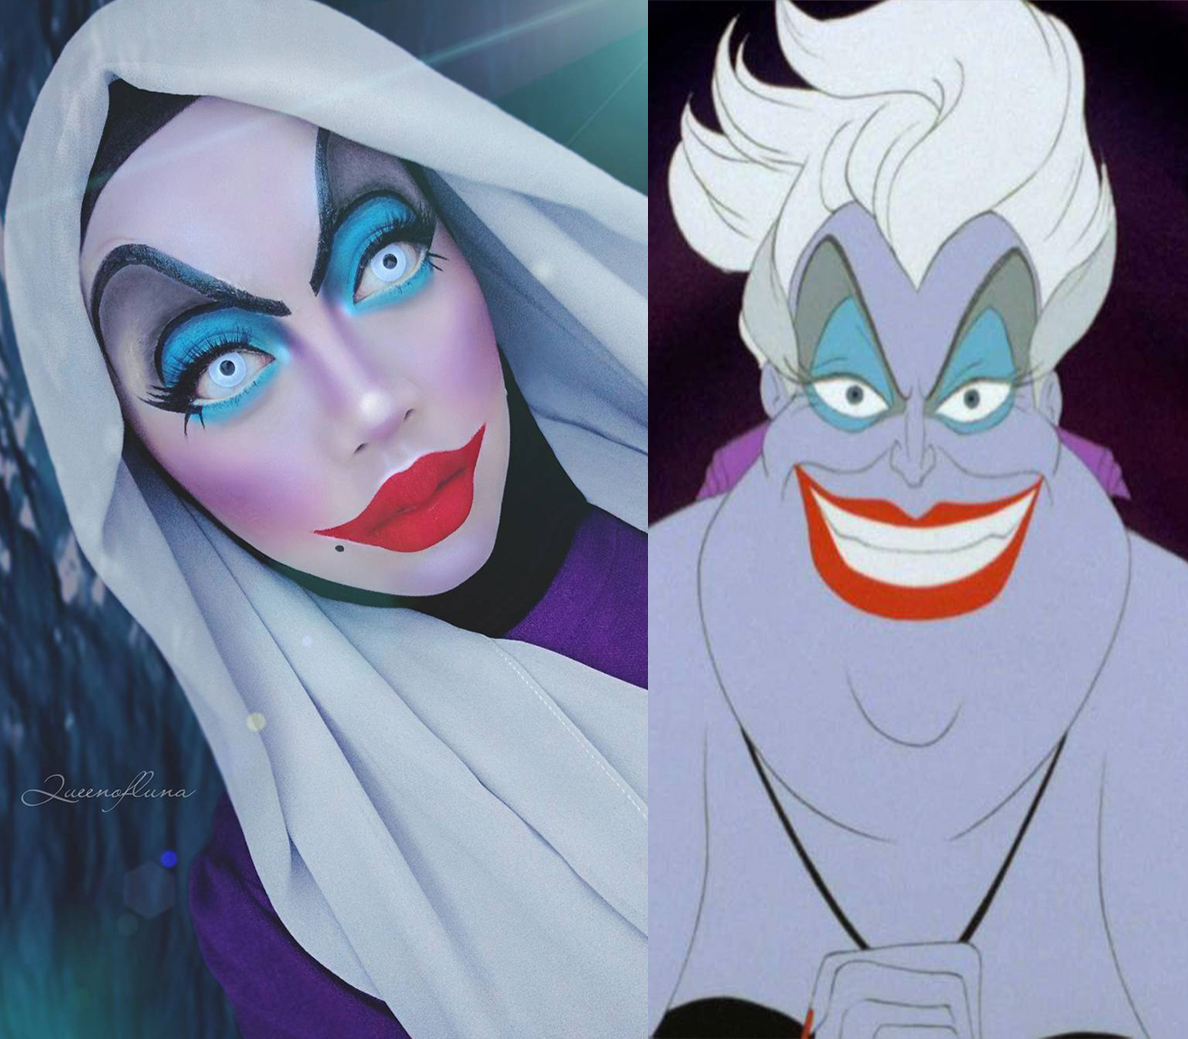 This Woman Uses Her Hijab And Makeup To Turn Herself Into Disney Characters